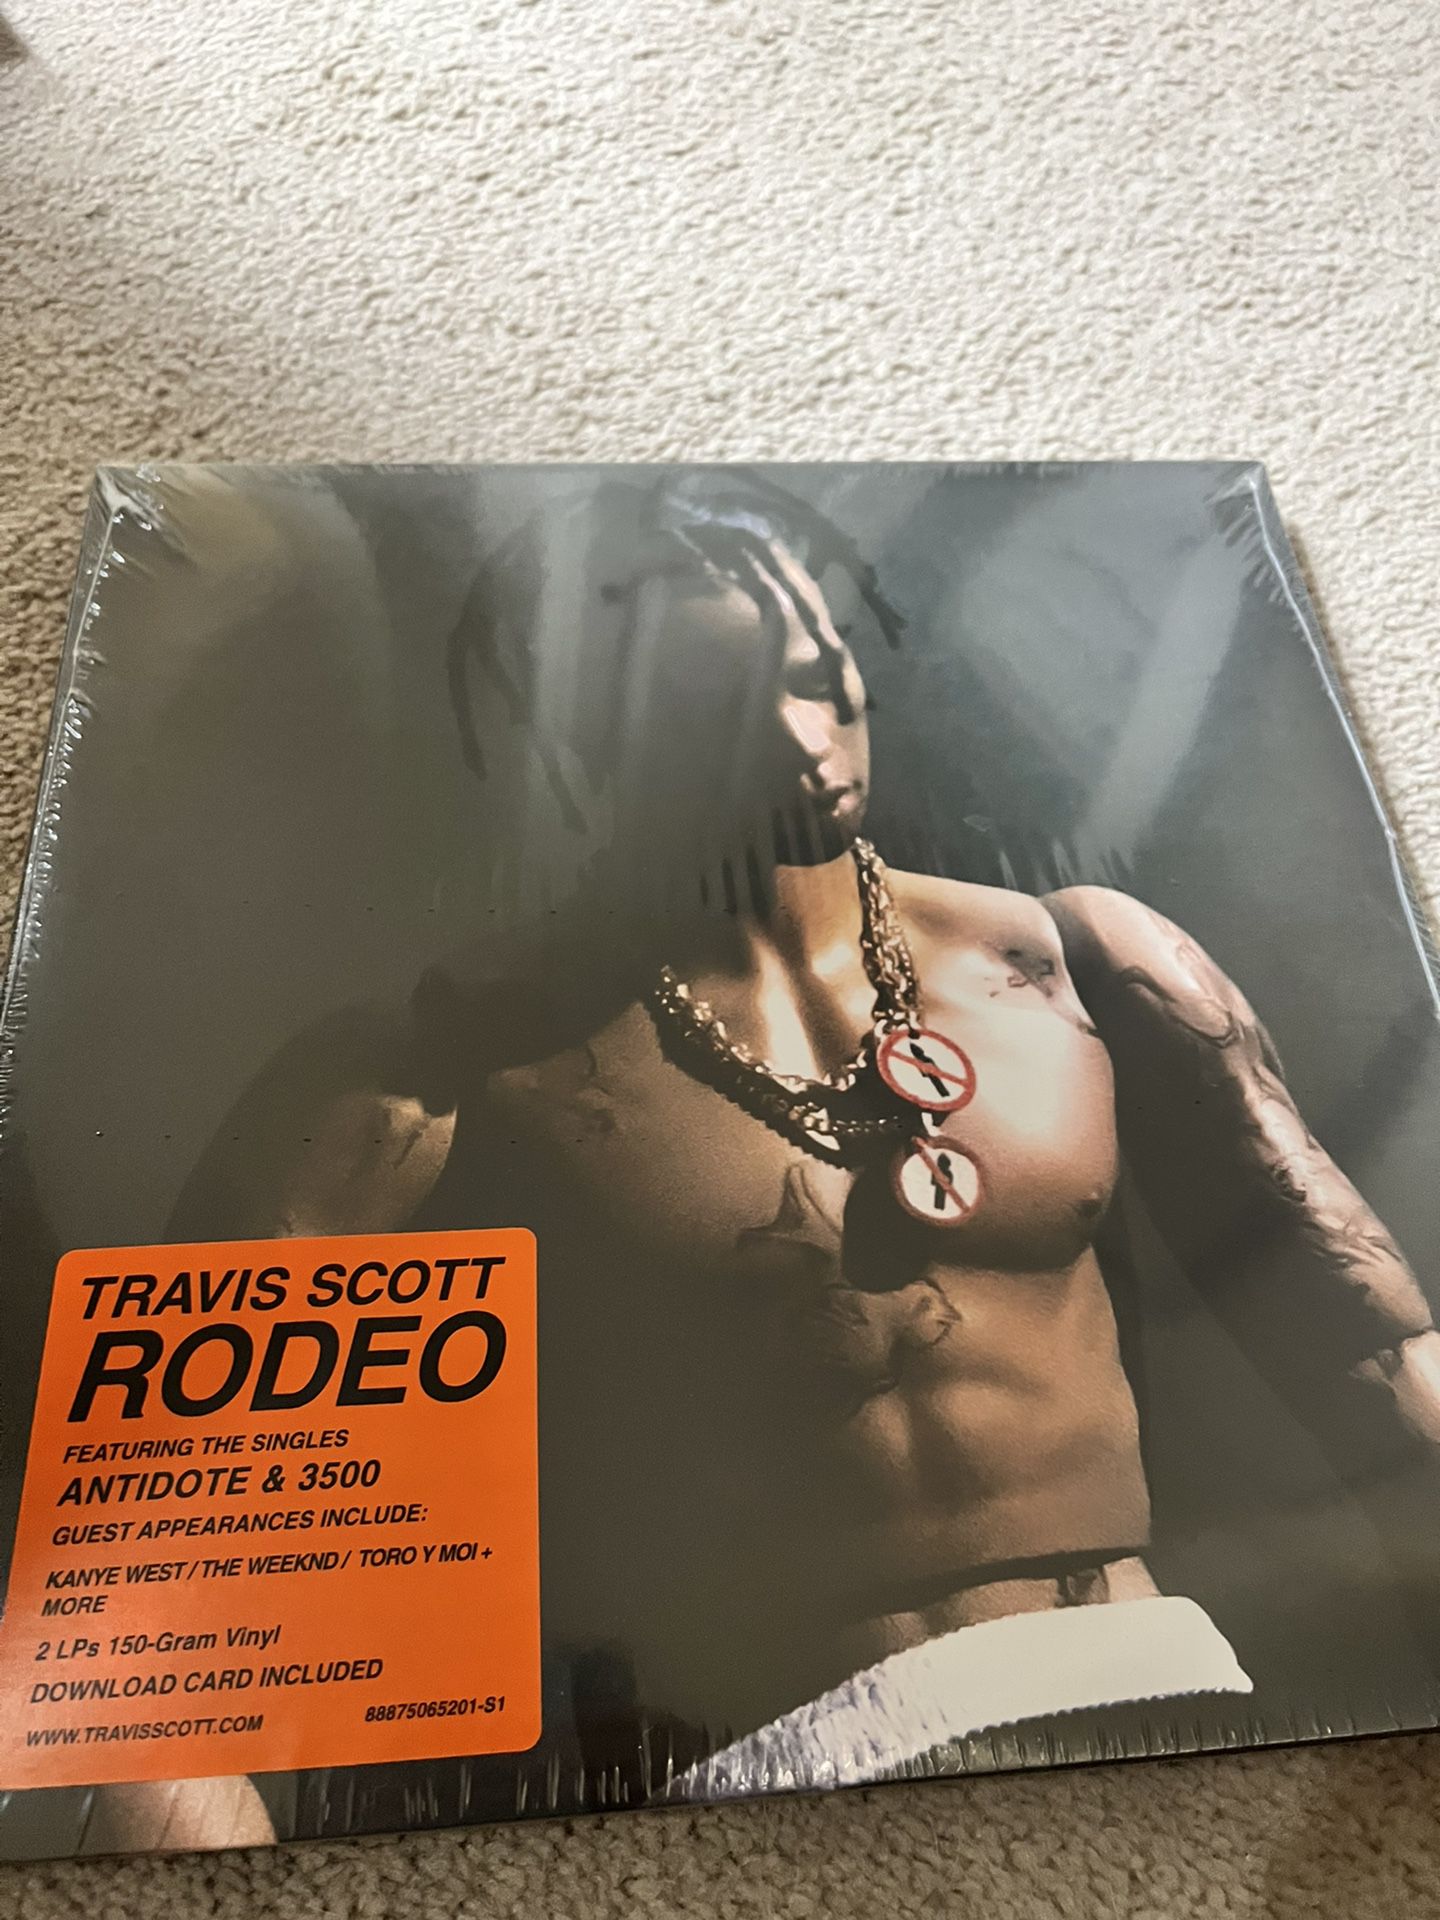 Vinyl Record: Travis Scott RODEO Wrapped for Sale in Spring, TX - OfferUp